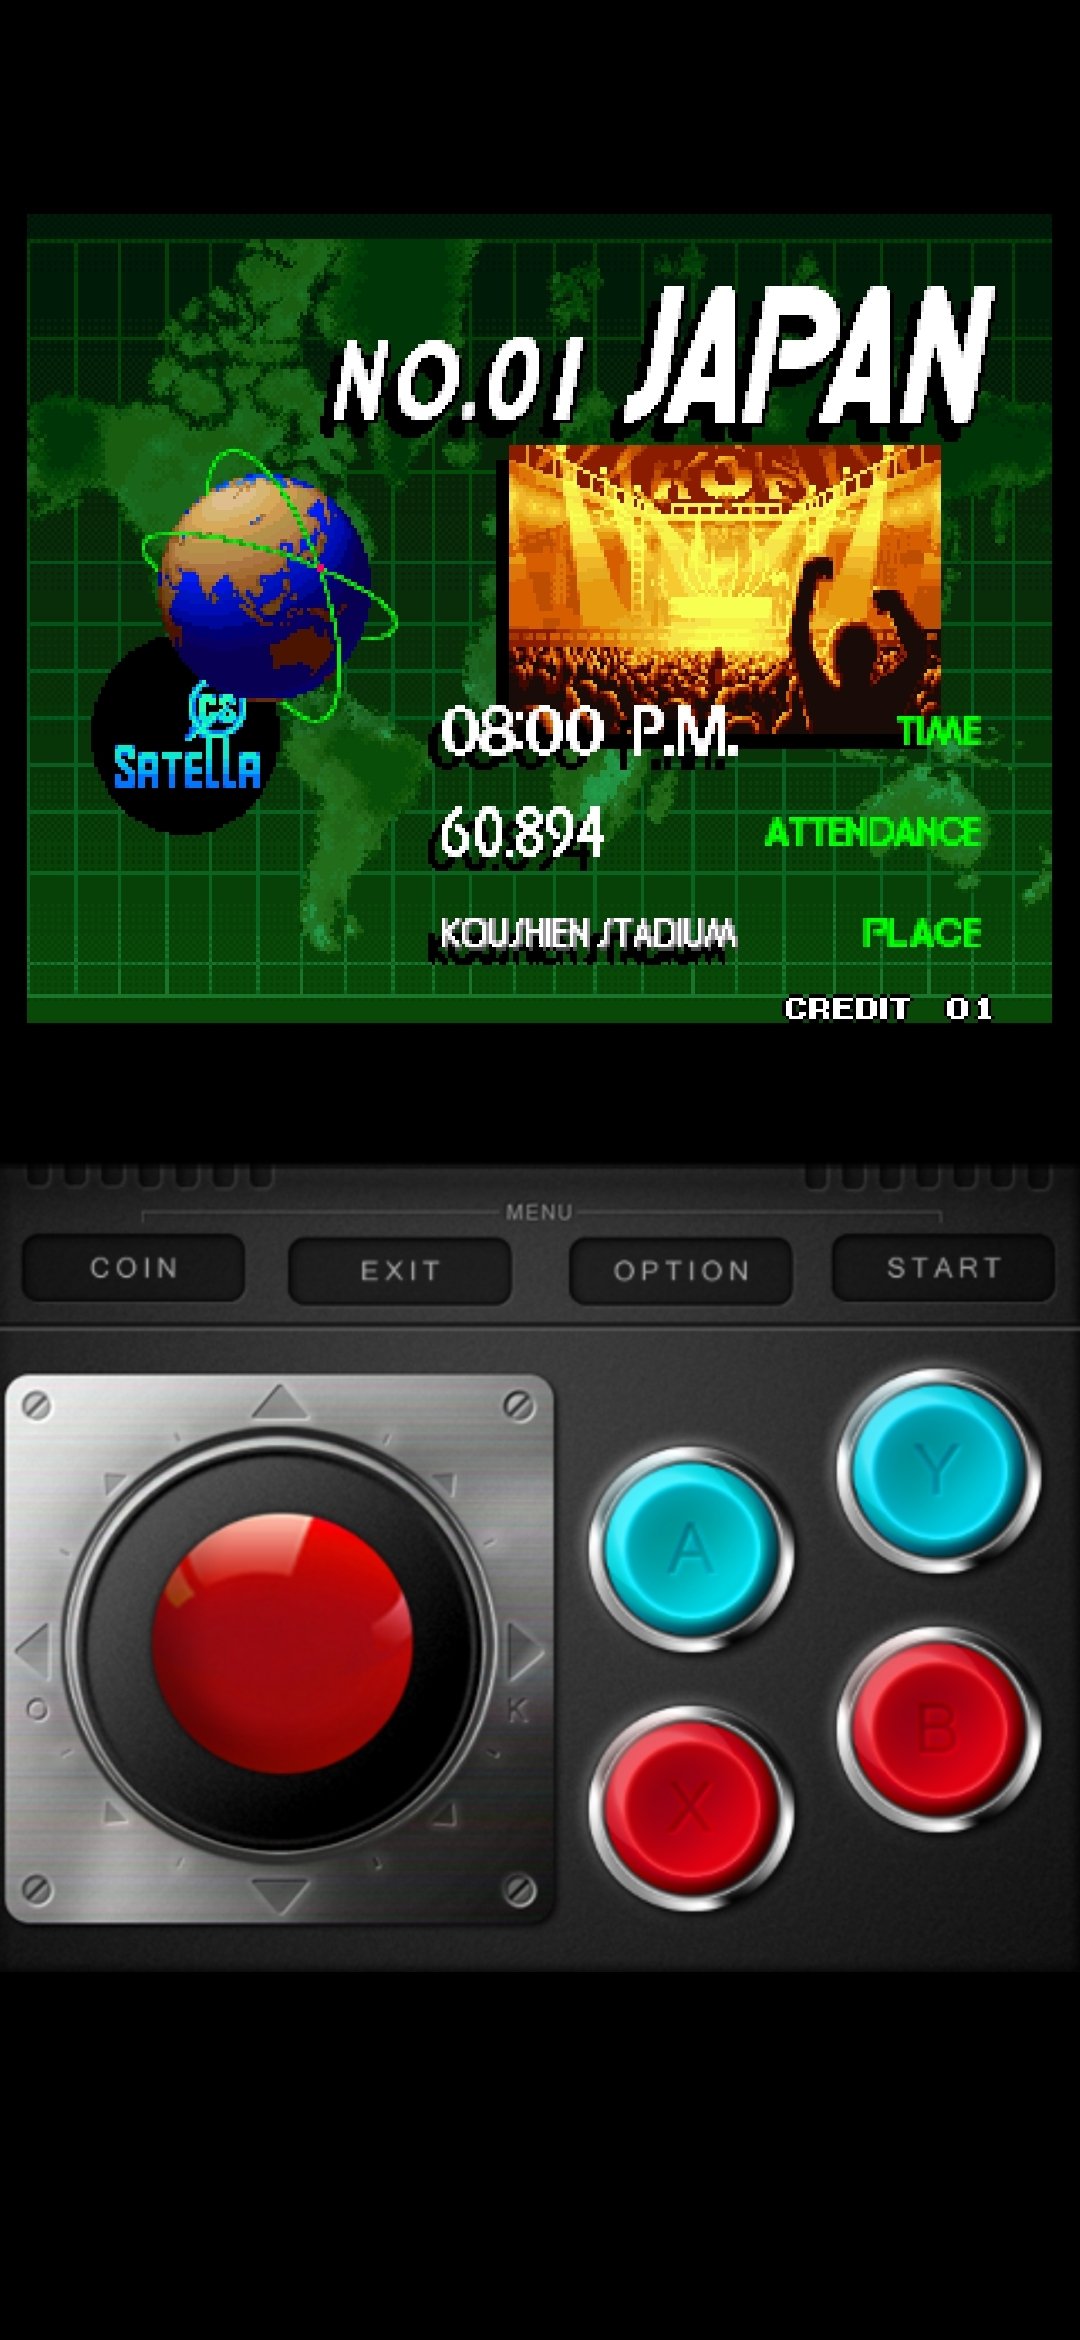 Download The King of Fighters '97 Emulator APK 4.13.0 for Android